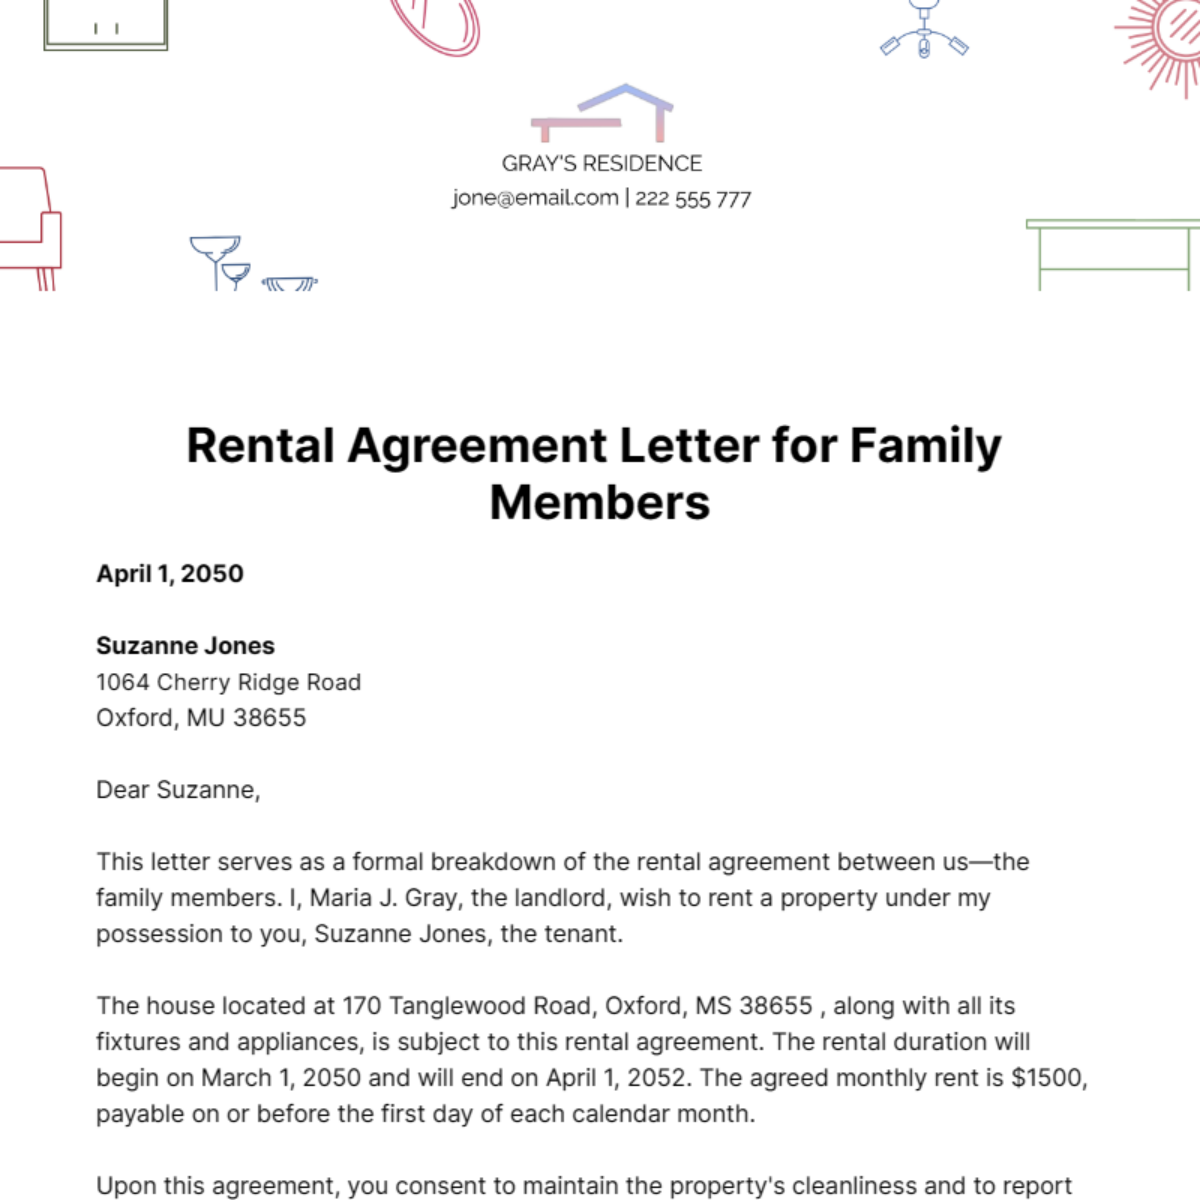 Free Rental Agreement Letter for Family Members  Template